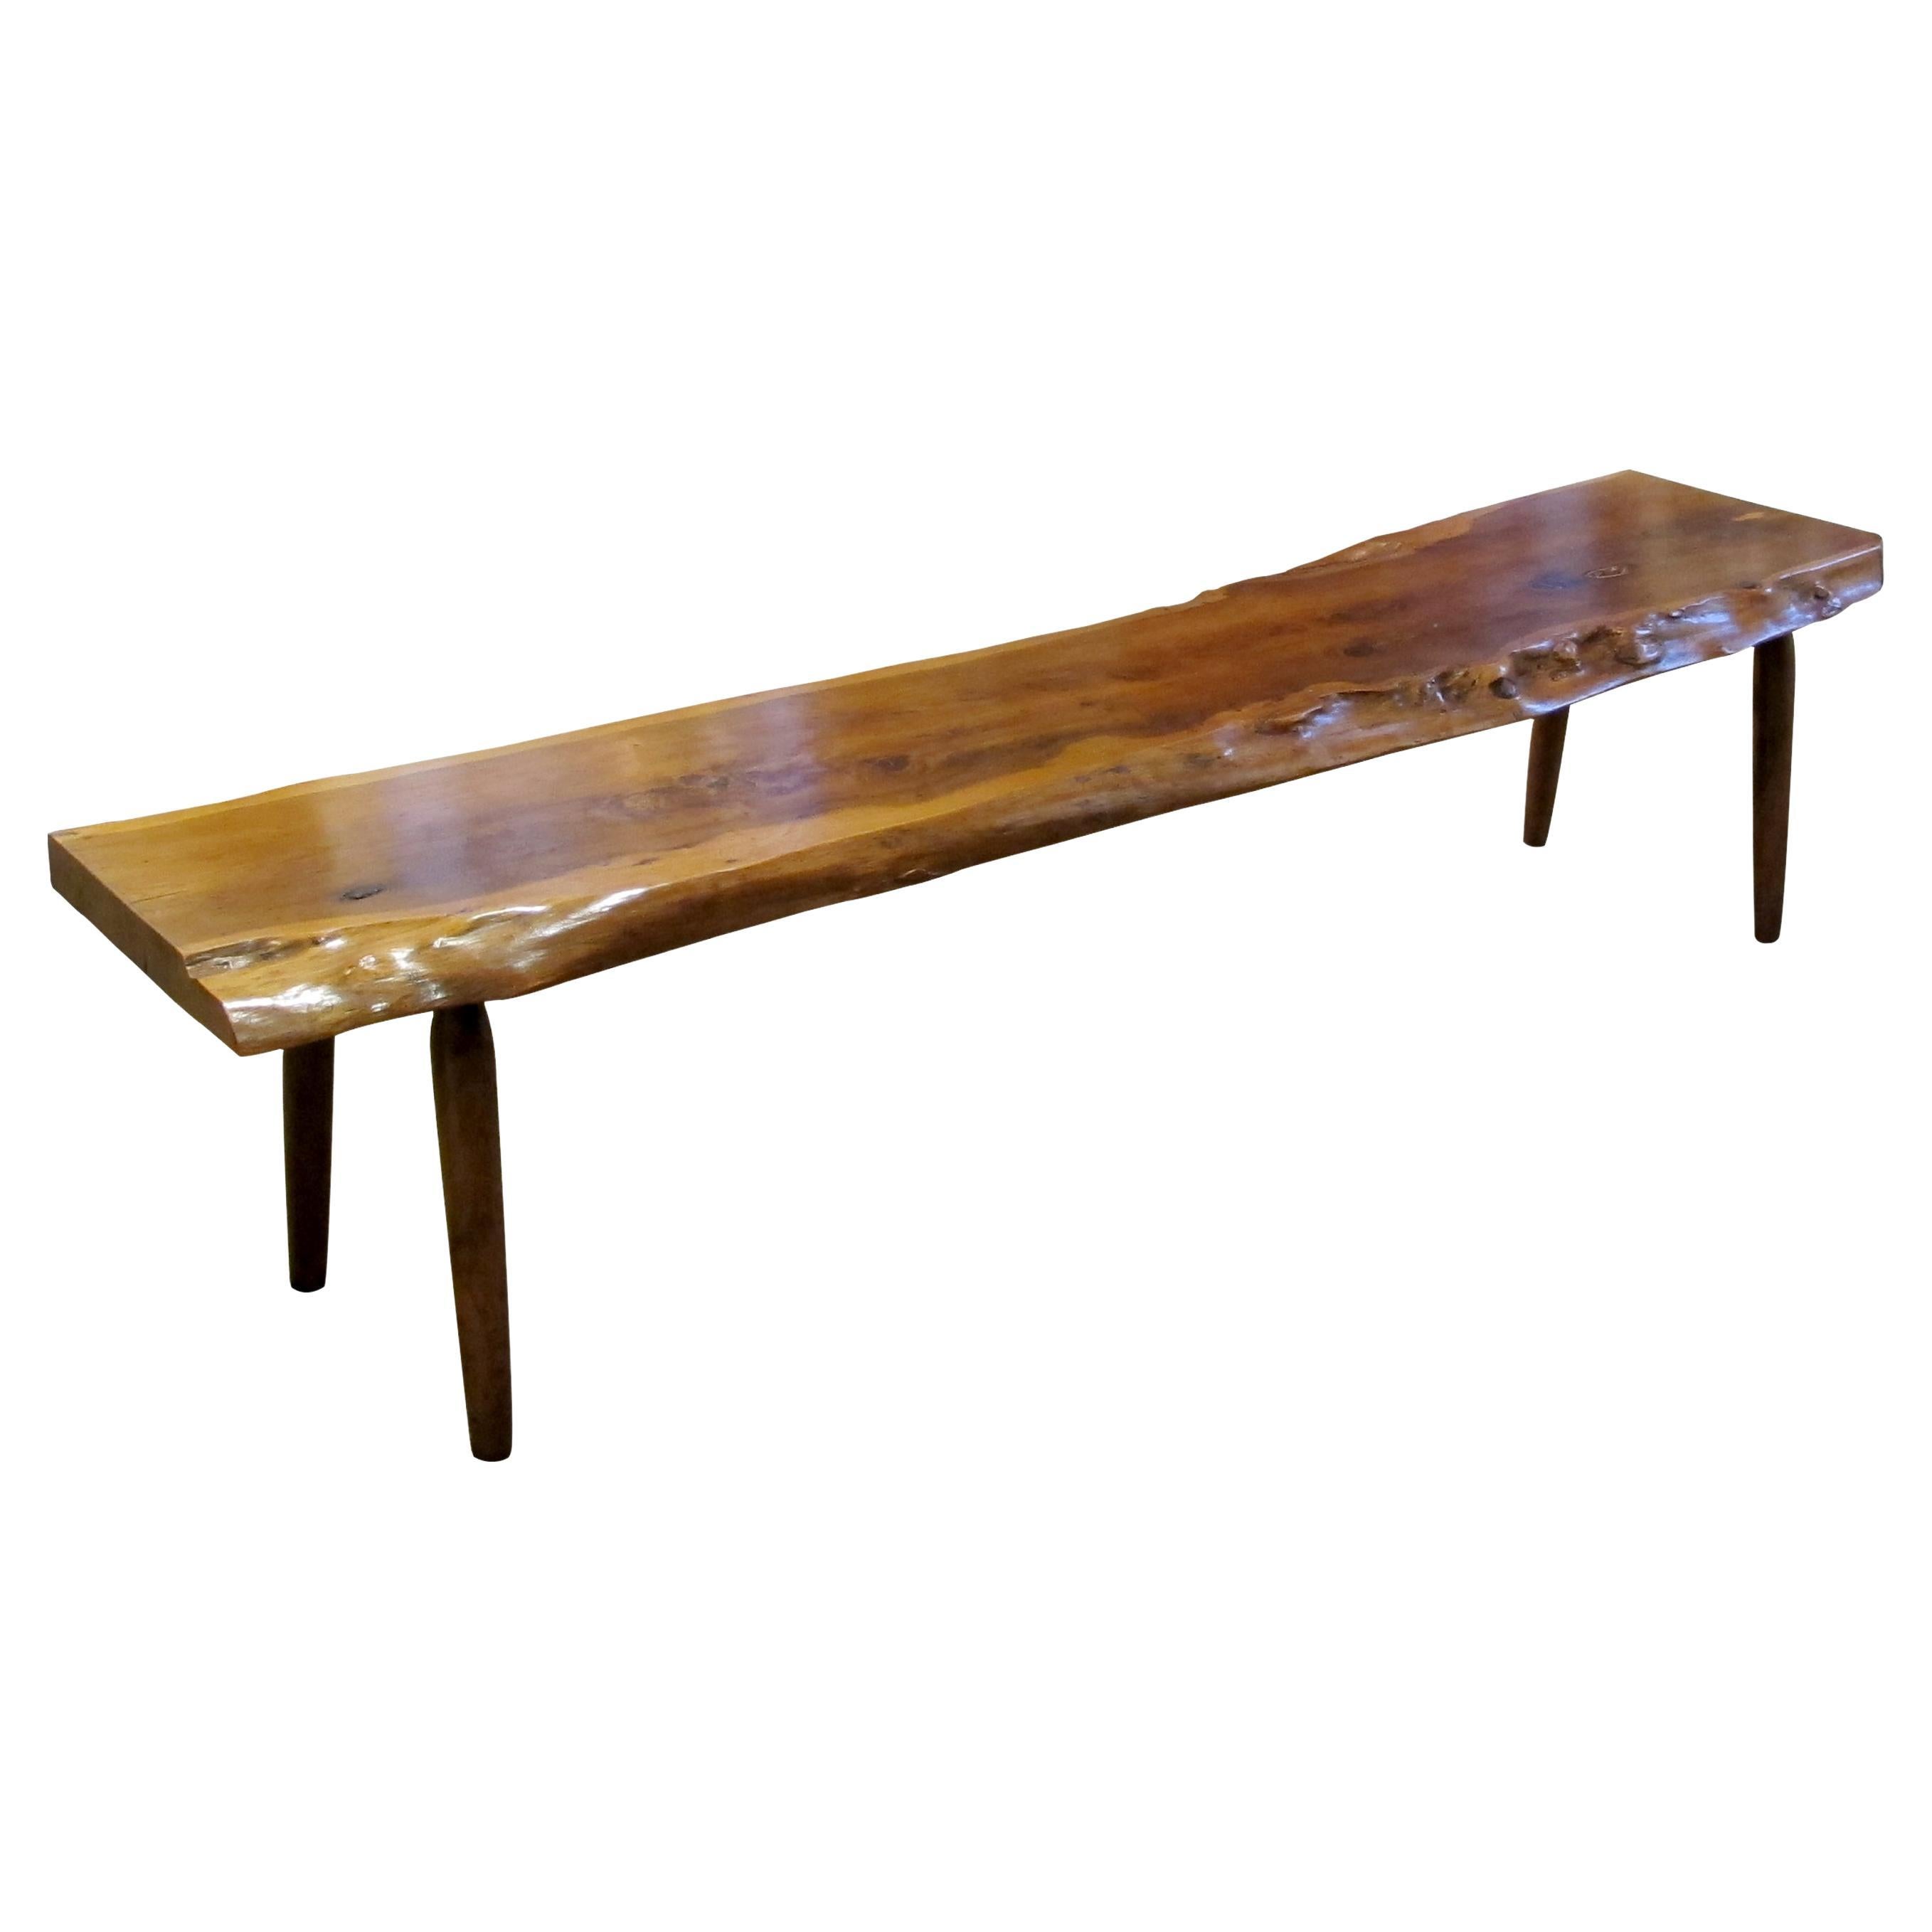 1960s English Live Edge Yew Wood Bench attributed to Reynolds Of Ludlow